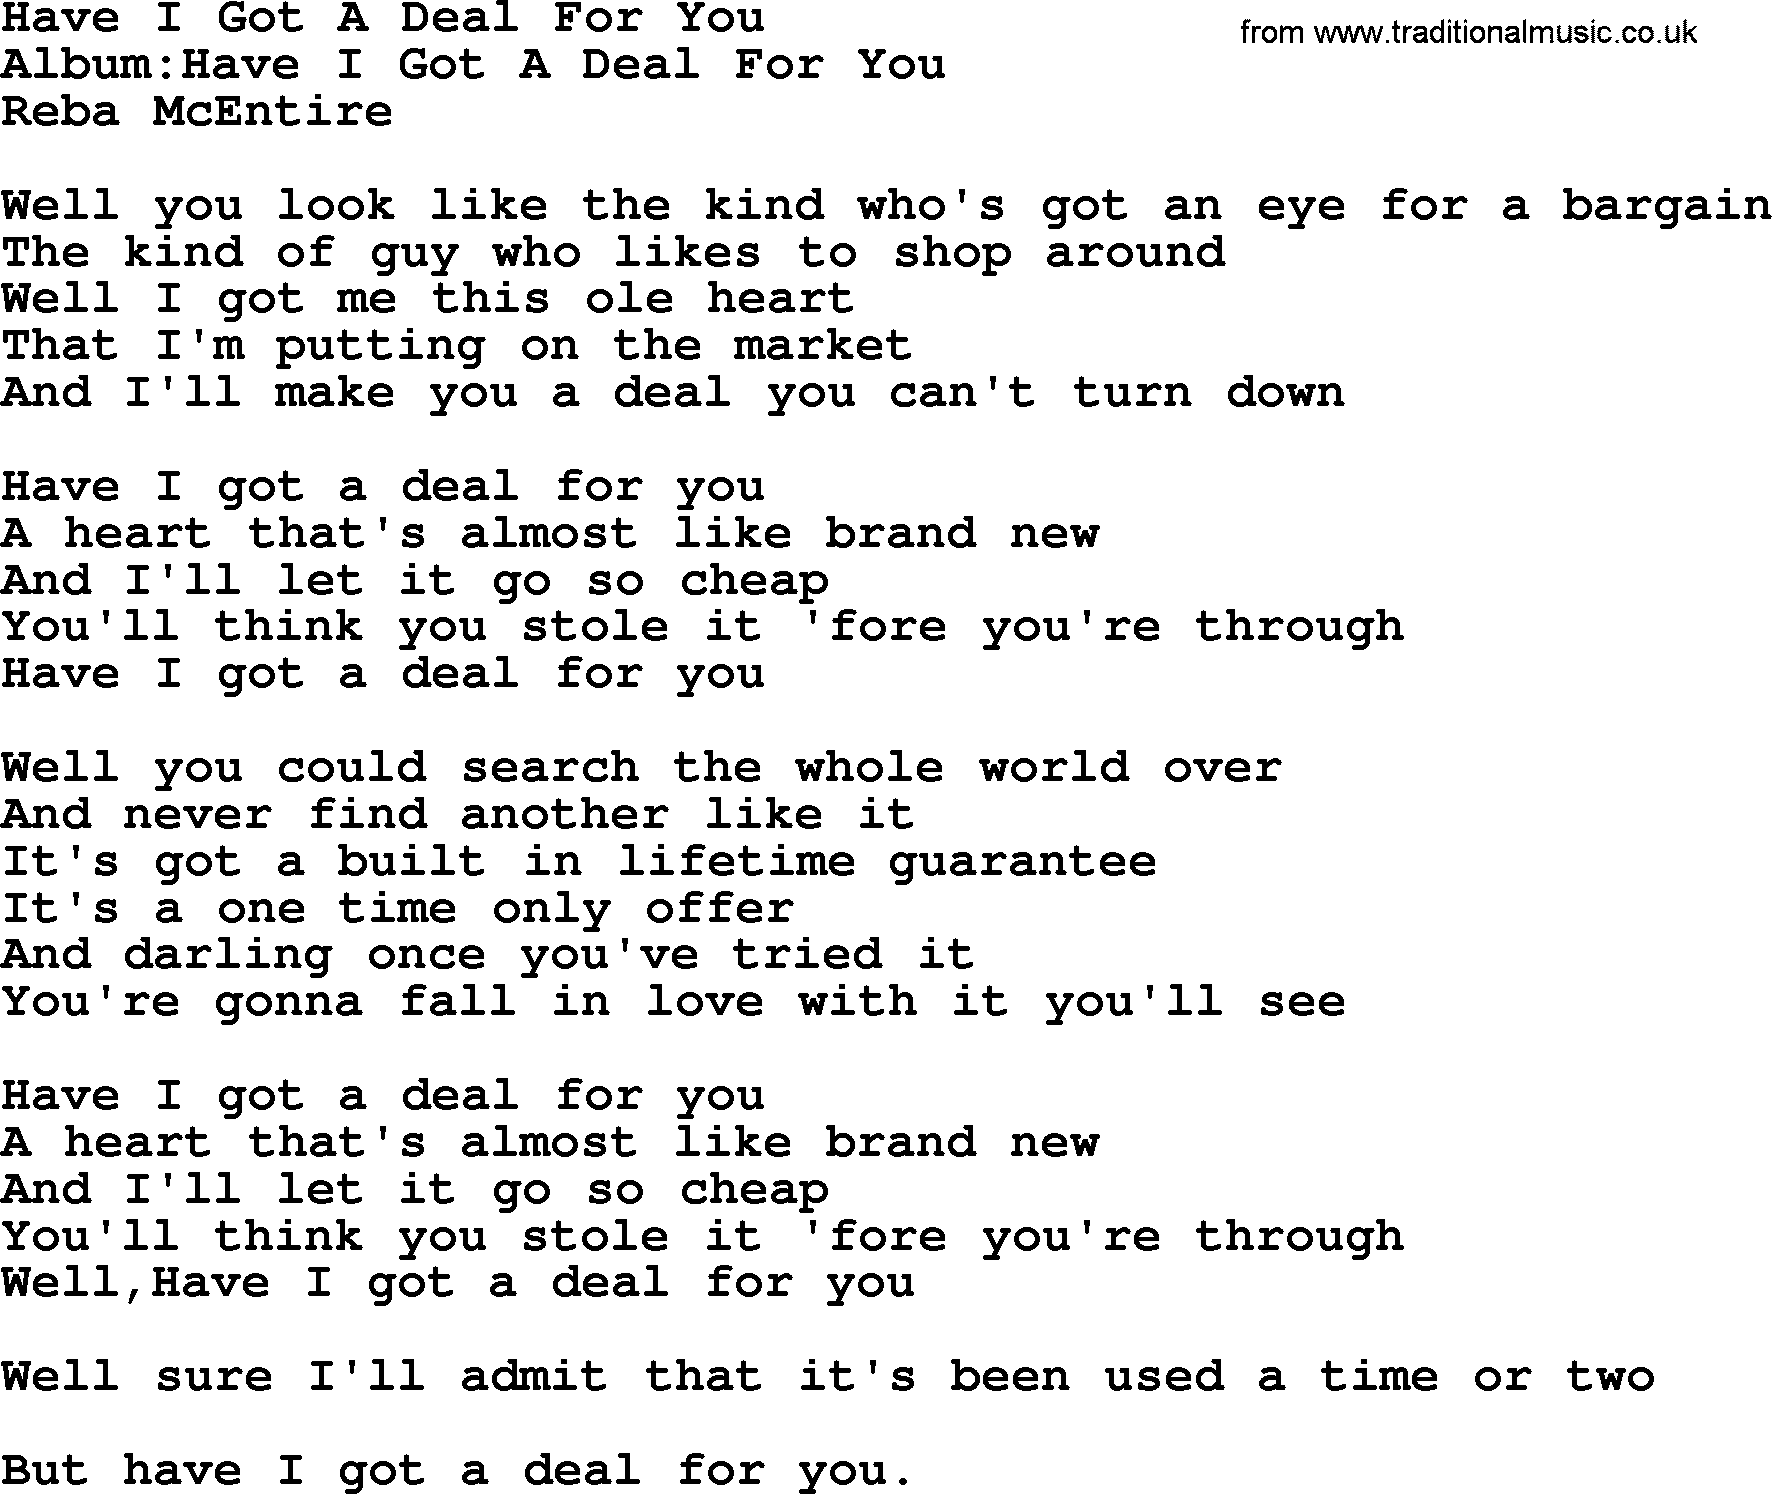 Reba McEntire song: Have I Got A Deal For You lyrics